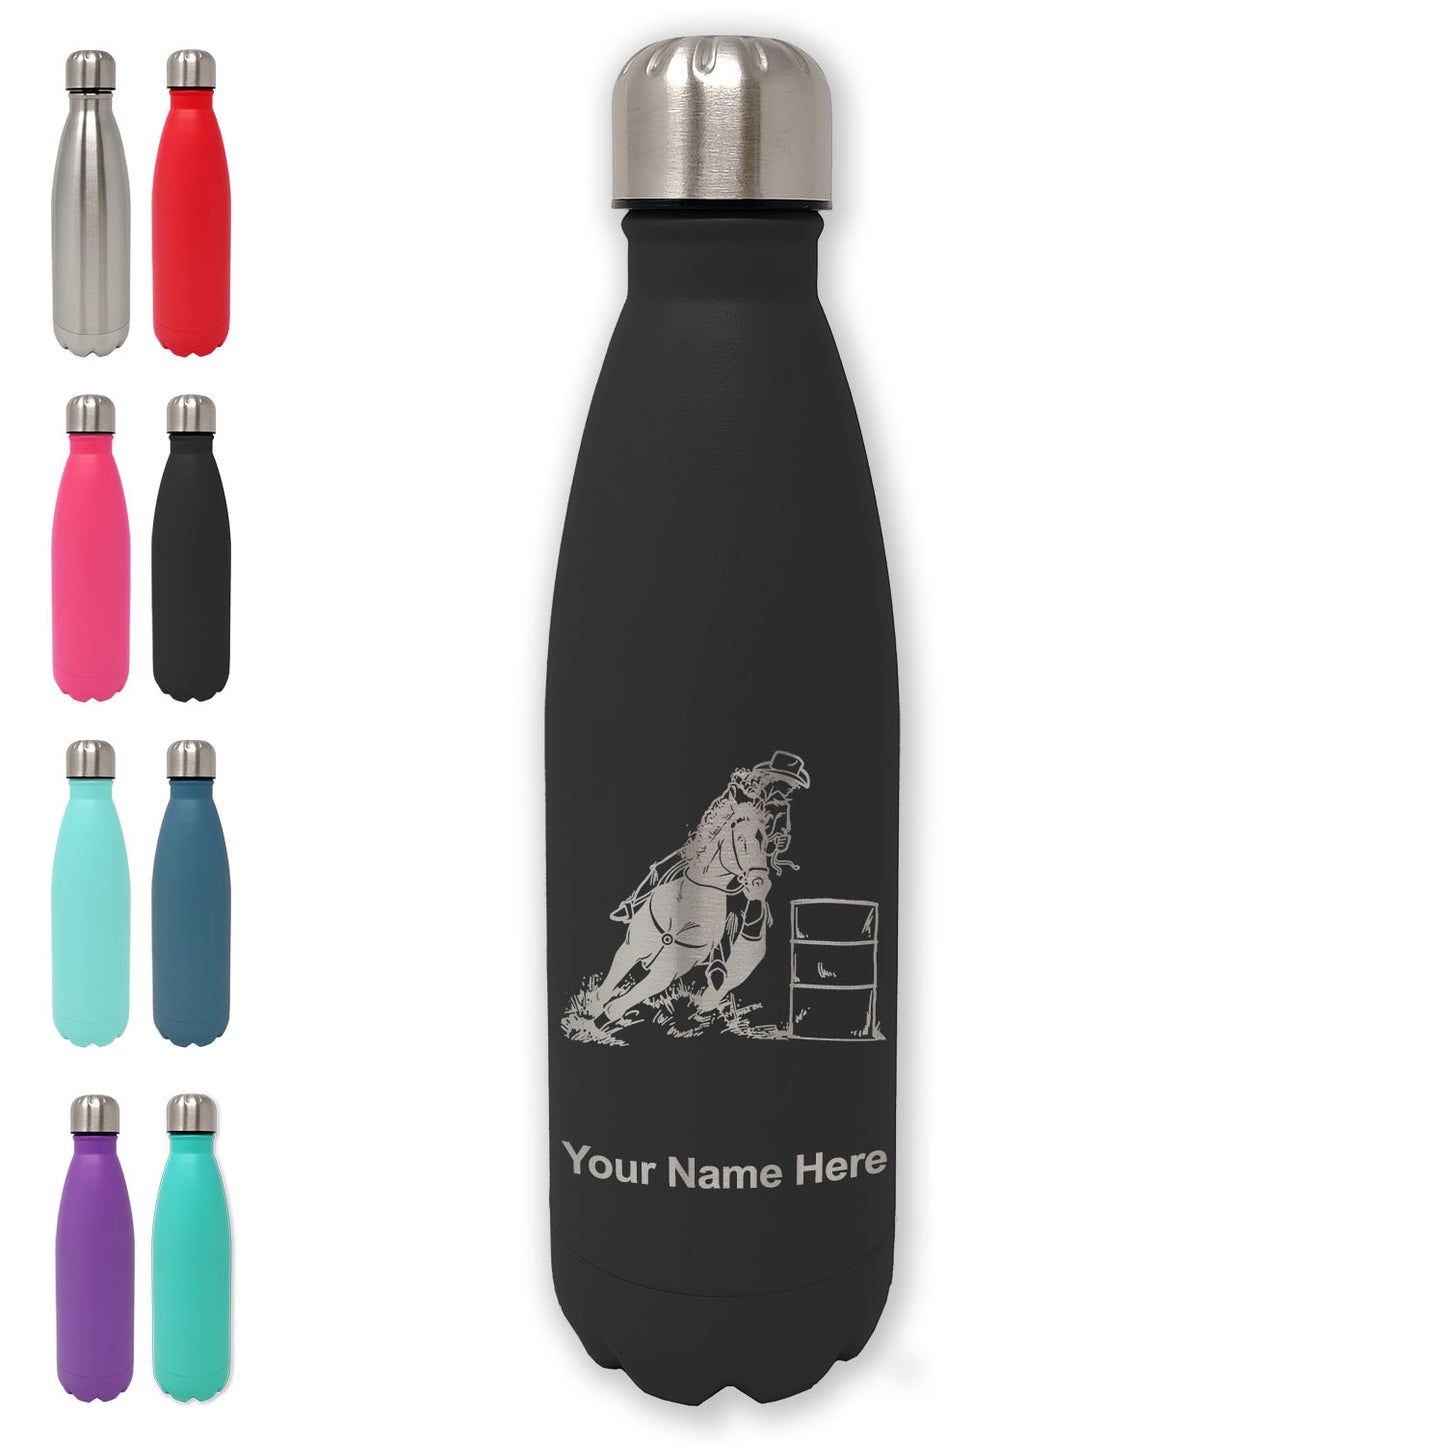 LaserGram Double Wall Water Bottle, Barrel Racer, Personalized Engraving Included